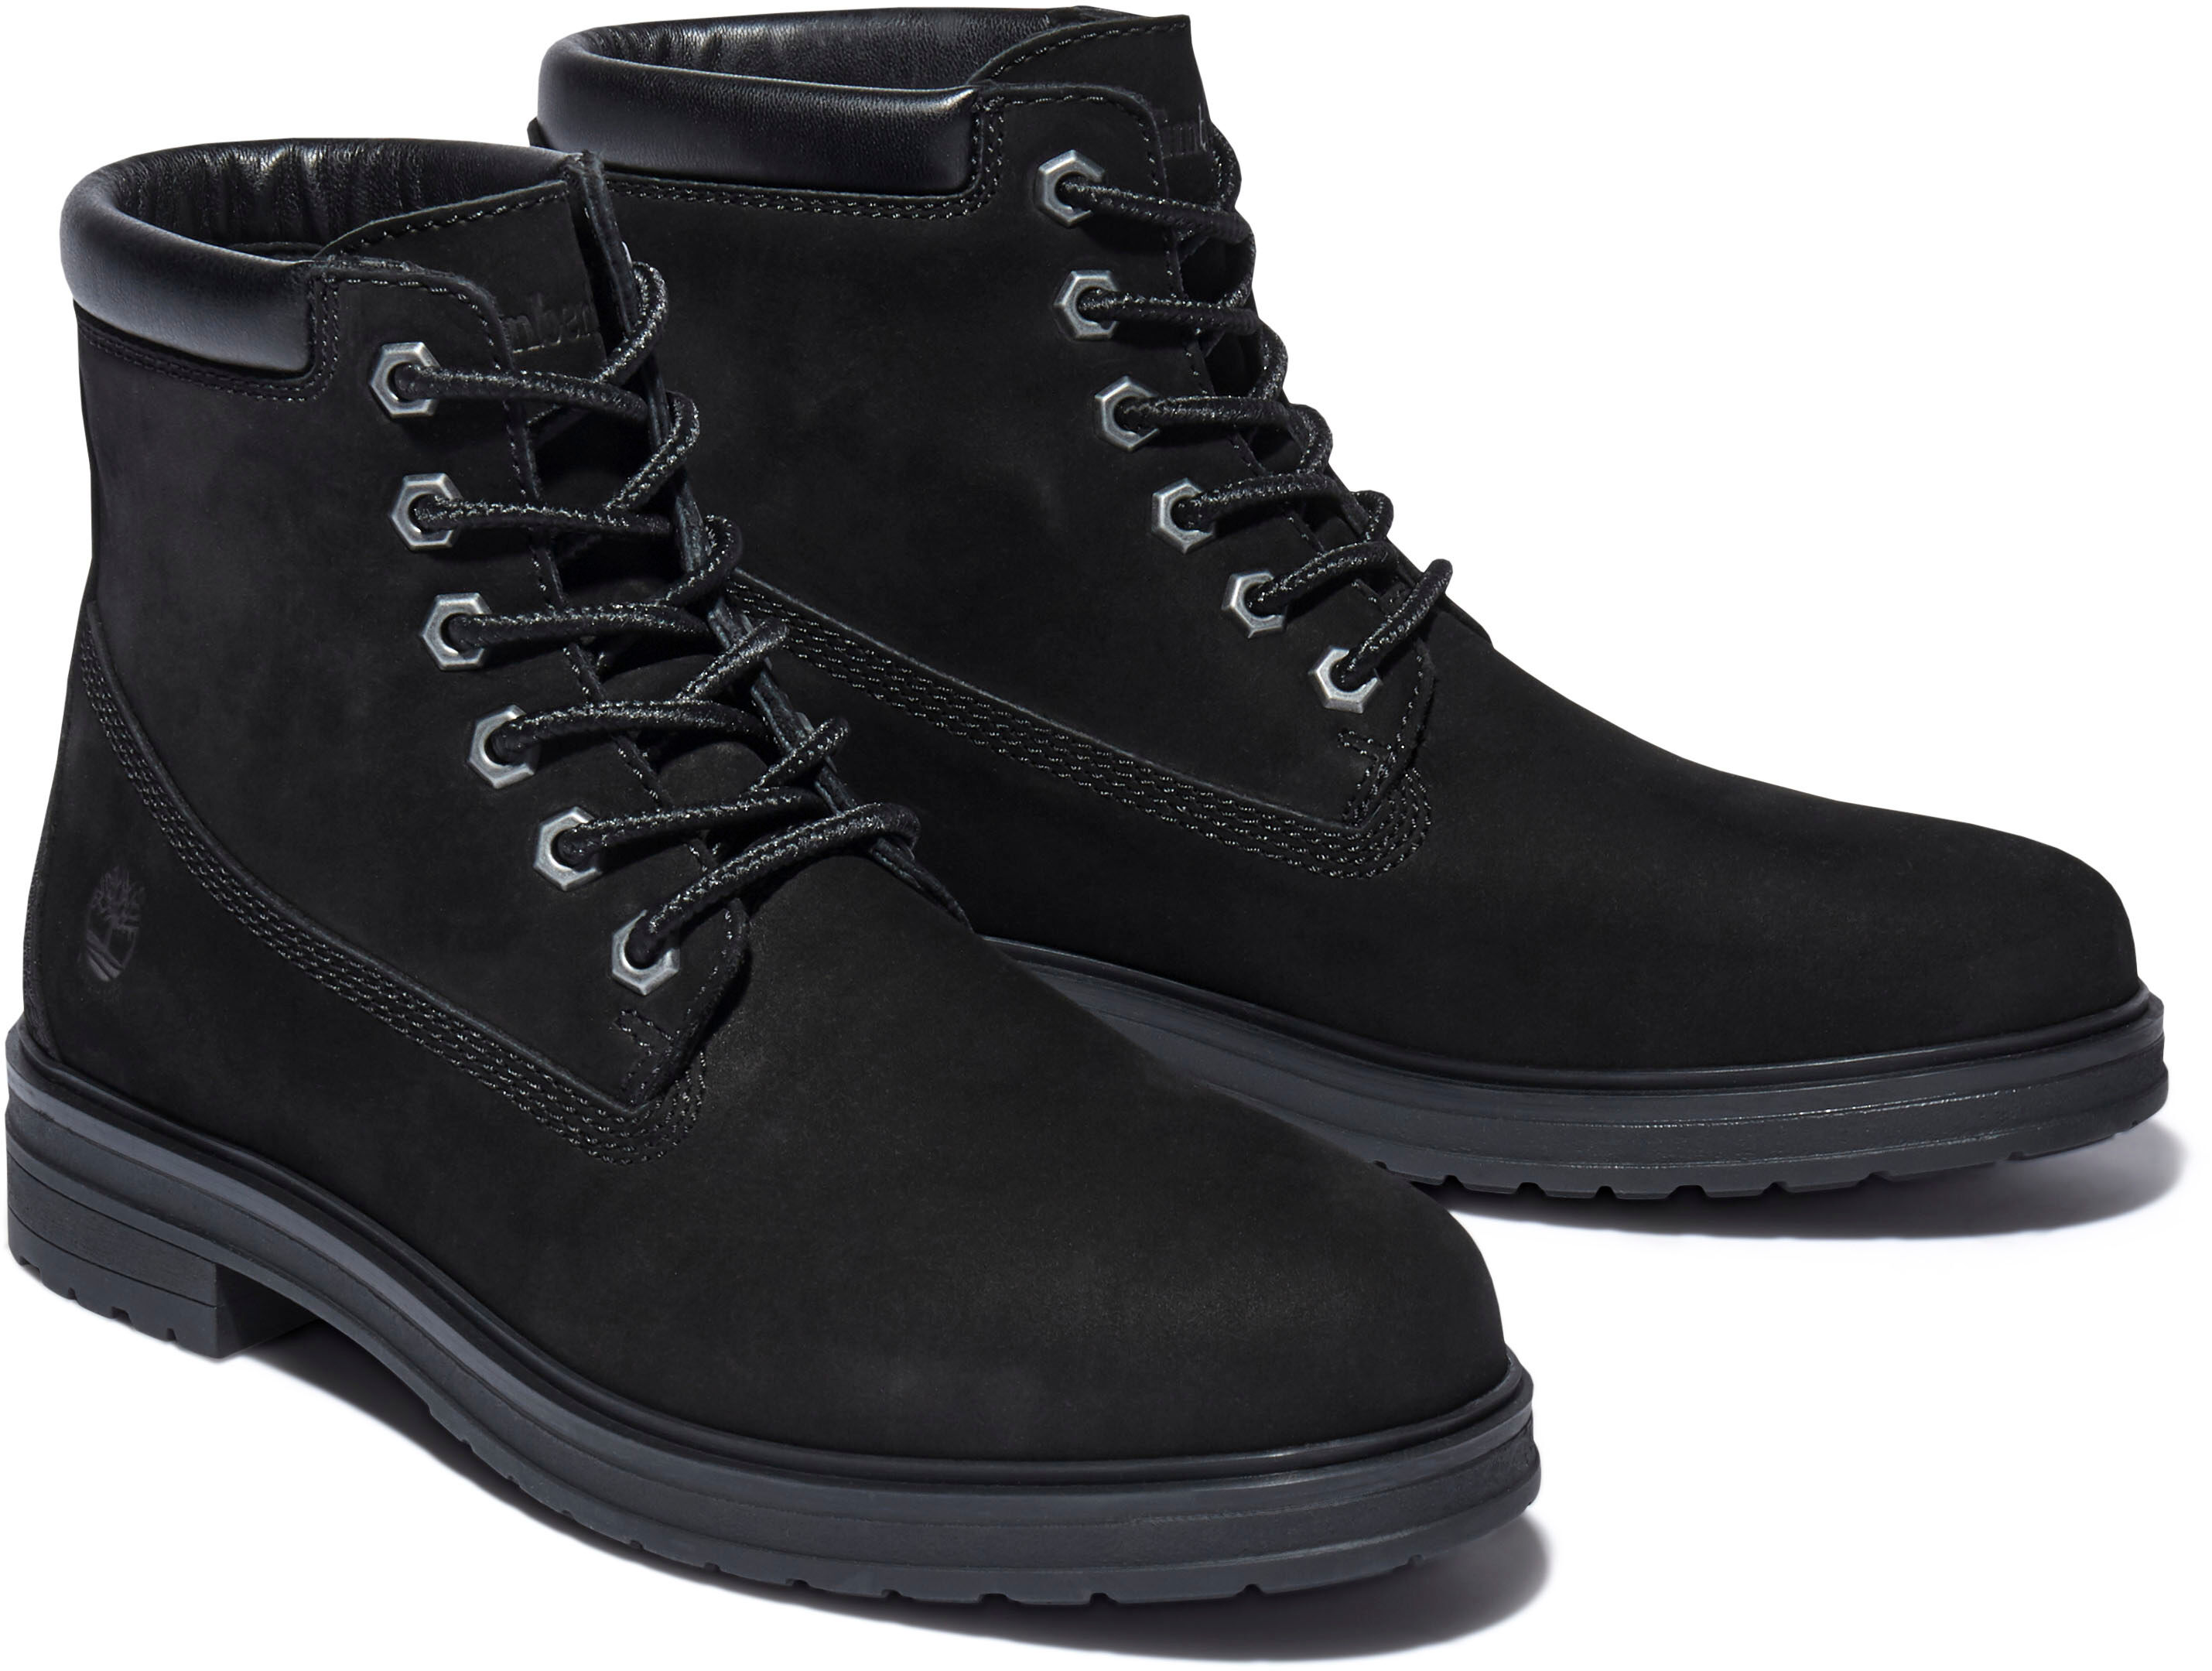 Timberland Schnürboots »Hannover Hill 6in Boot WP« schwarz  36 37 37,5 38,5 38 39 39,5 40 41 41,5 42